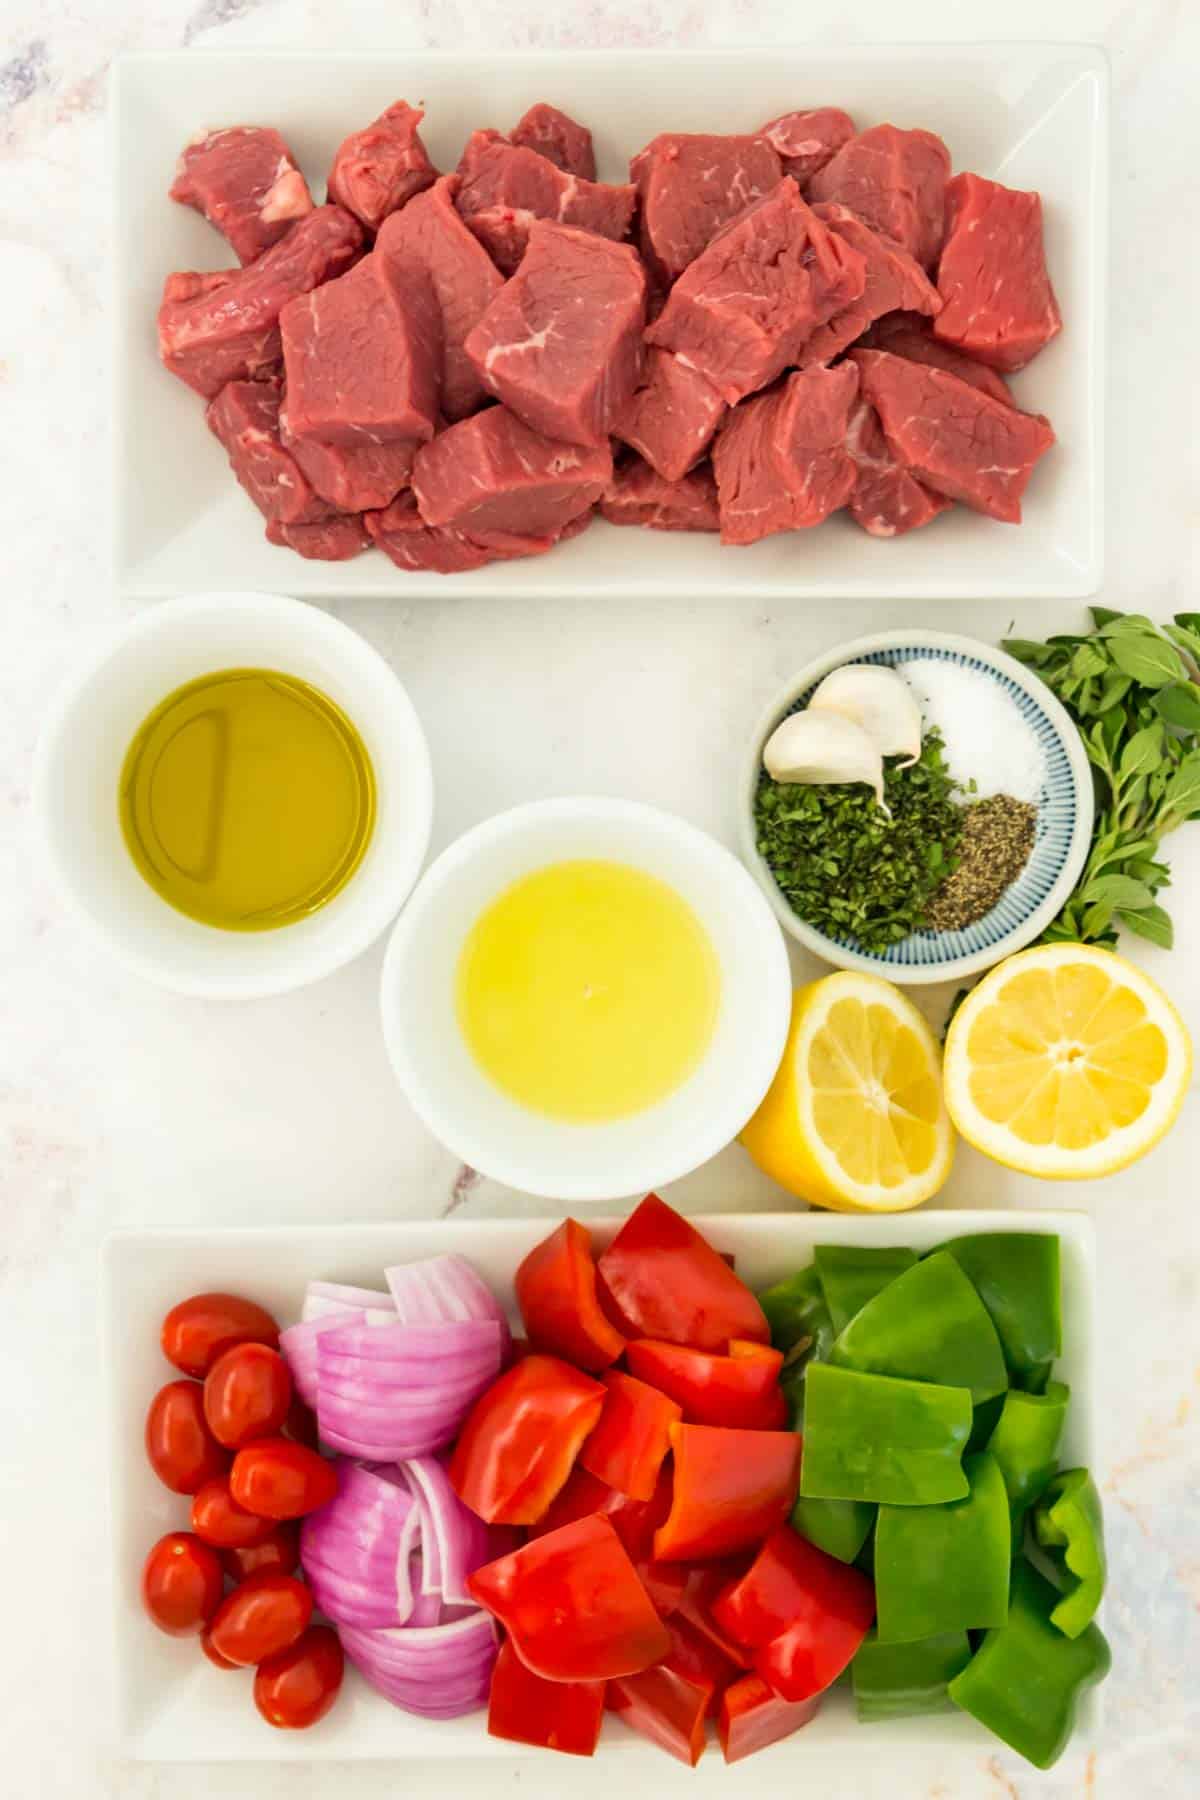 A plate of beef cubes, cut vegetables and marinade ingredients.